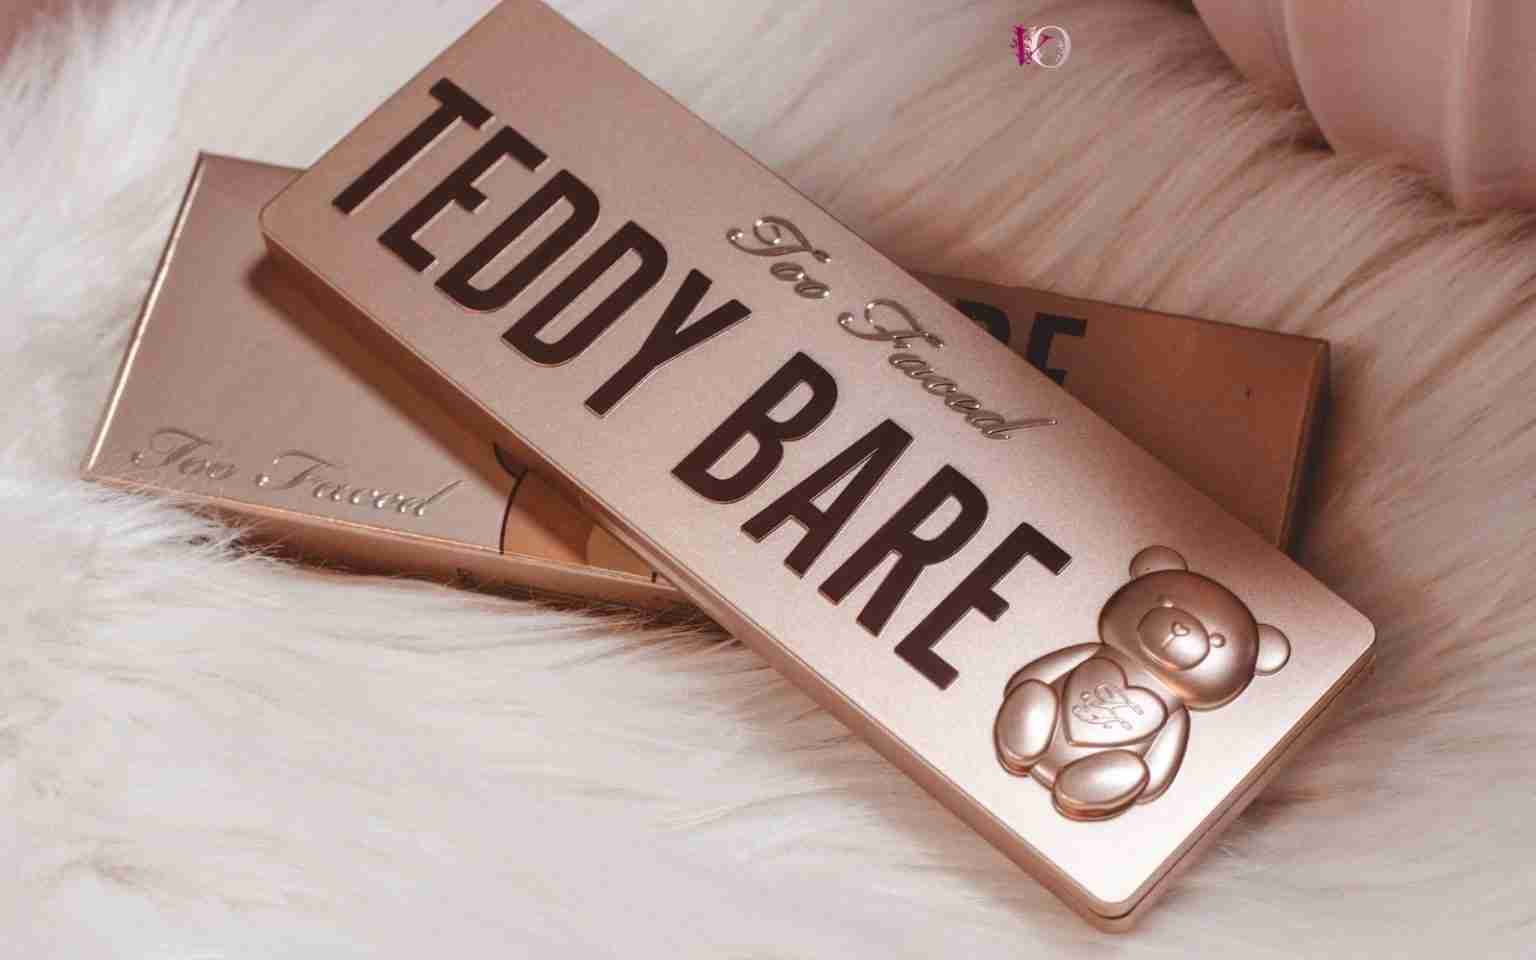 Too Faced Teddy Bare It All Eye Shadow Palette